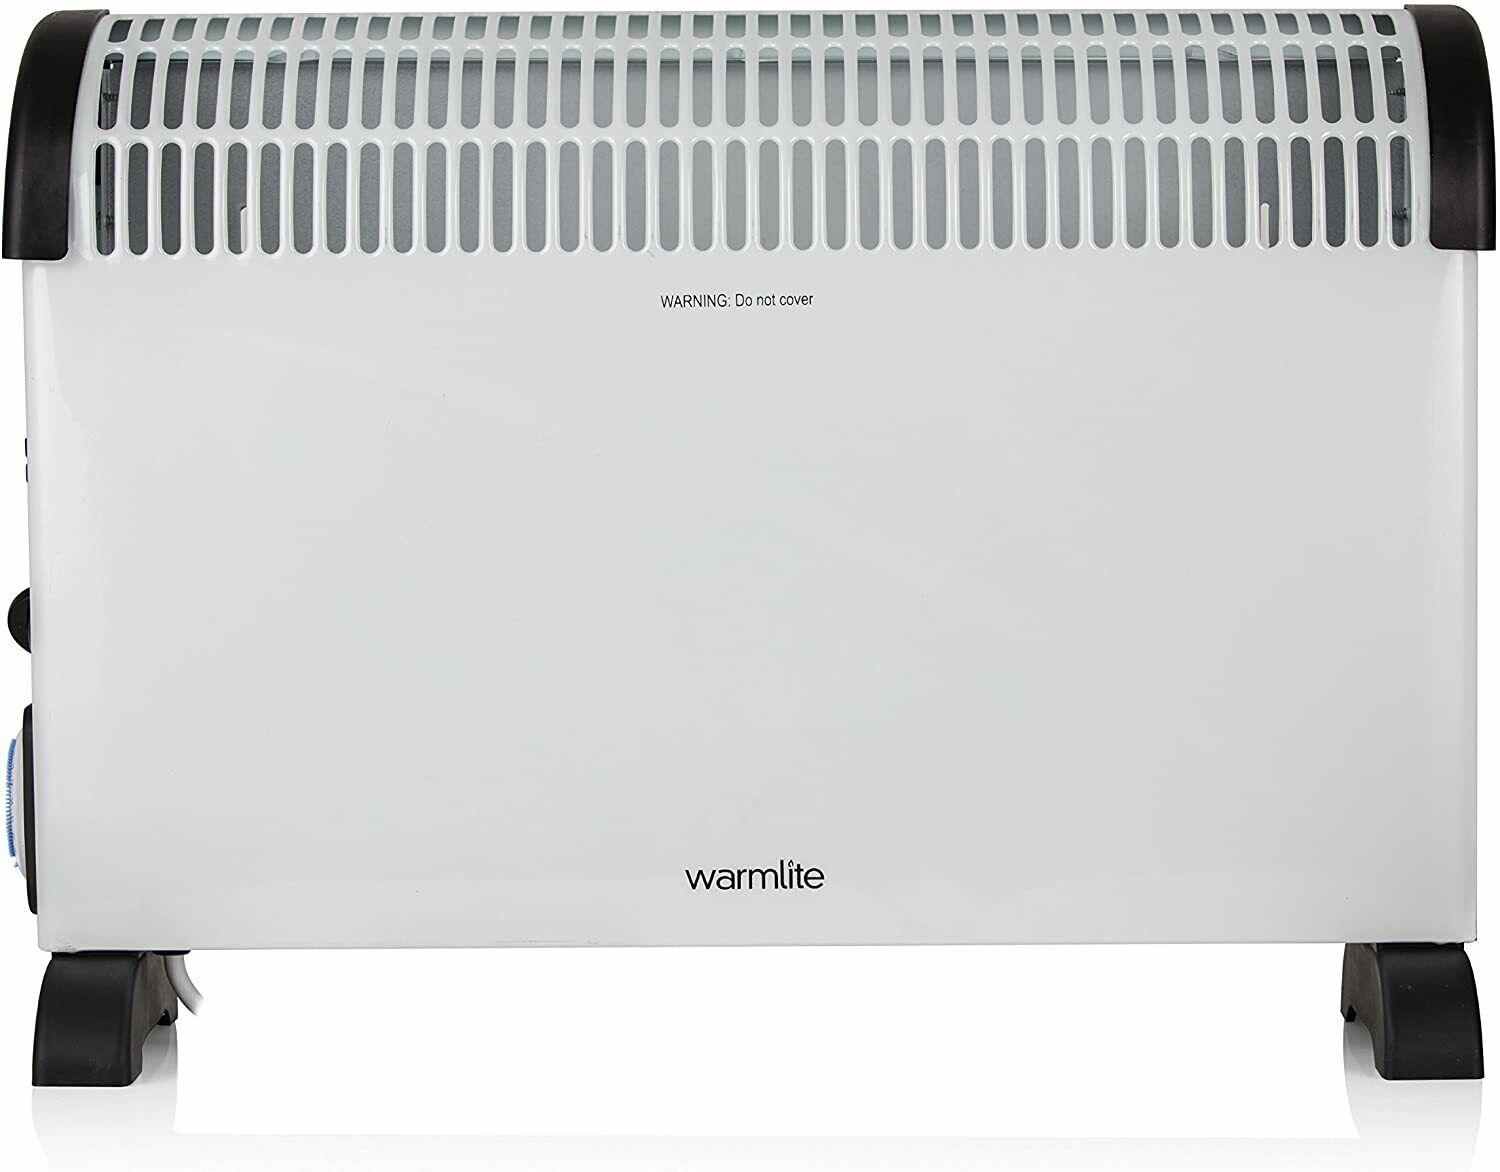 WL41006 3000W Turbo Convection Heater